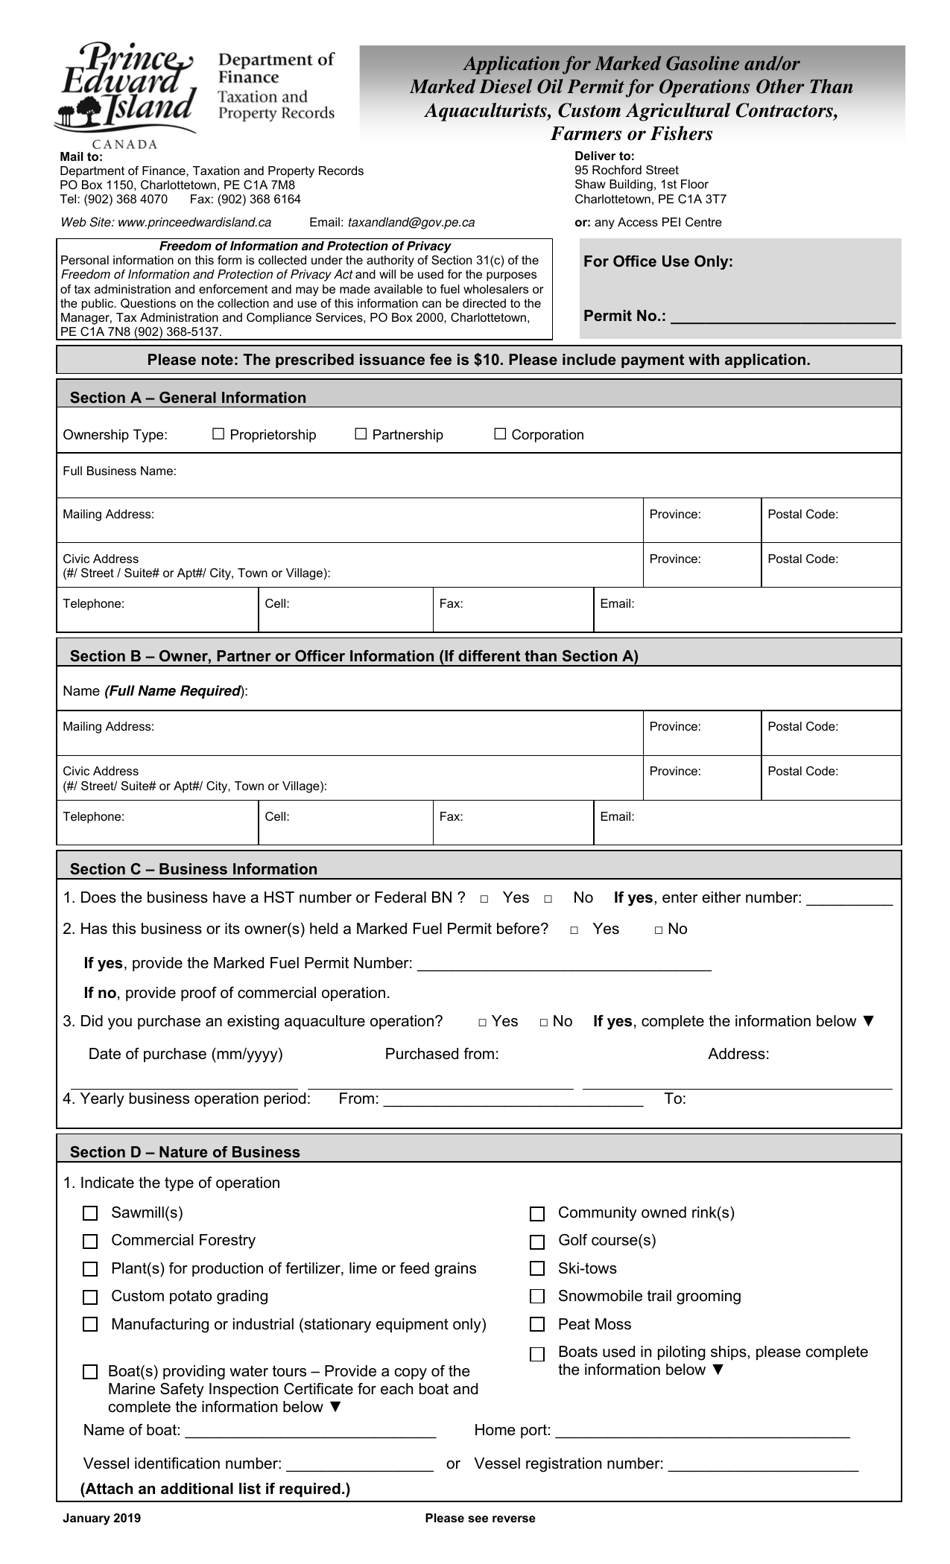 Application for Marked Gasoline and / or Marked Diesel Oil Permit for Operations Other Than Aquaculturists, Custom Agricultural Contractors, Farmers or Fishers - Prince Edward Island, Canada, Page 1